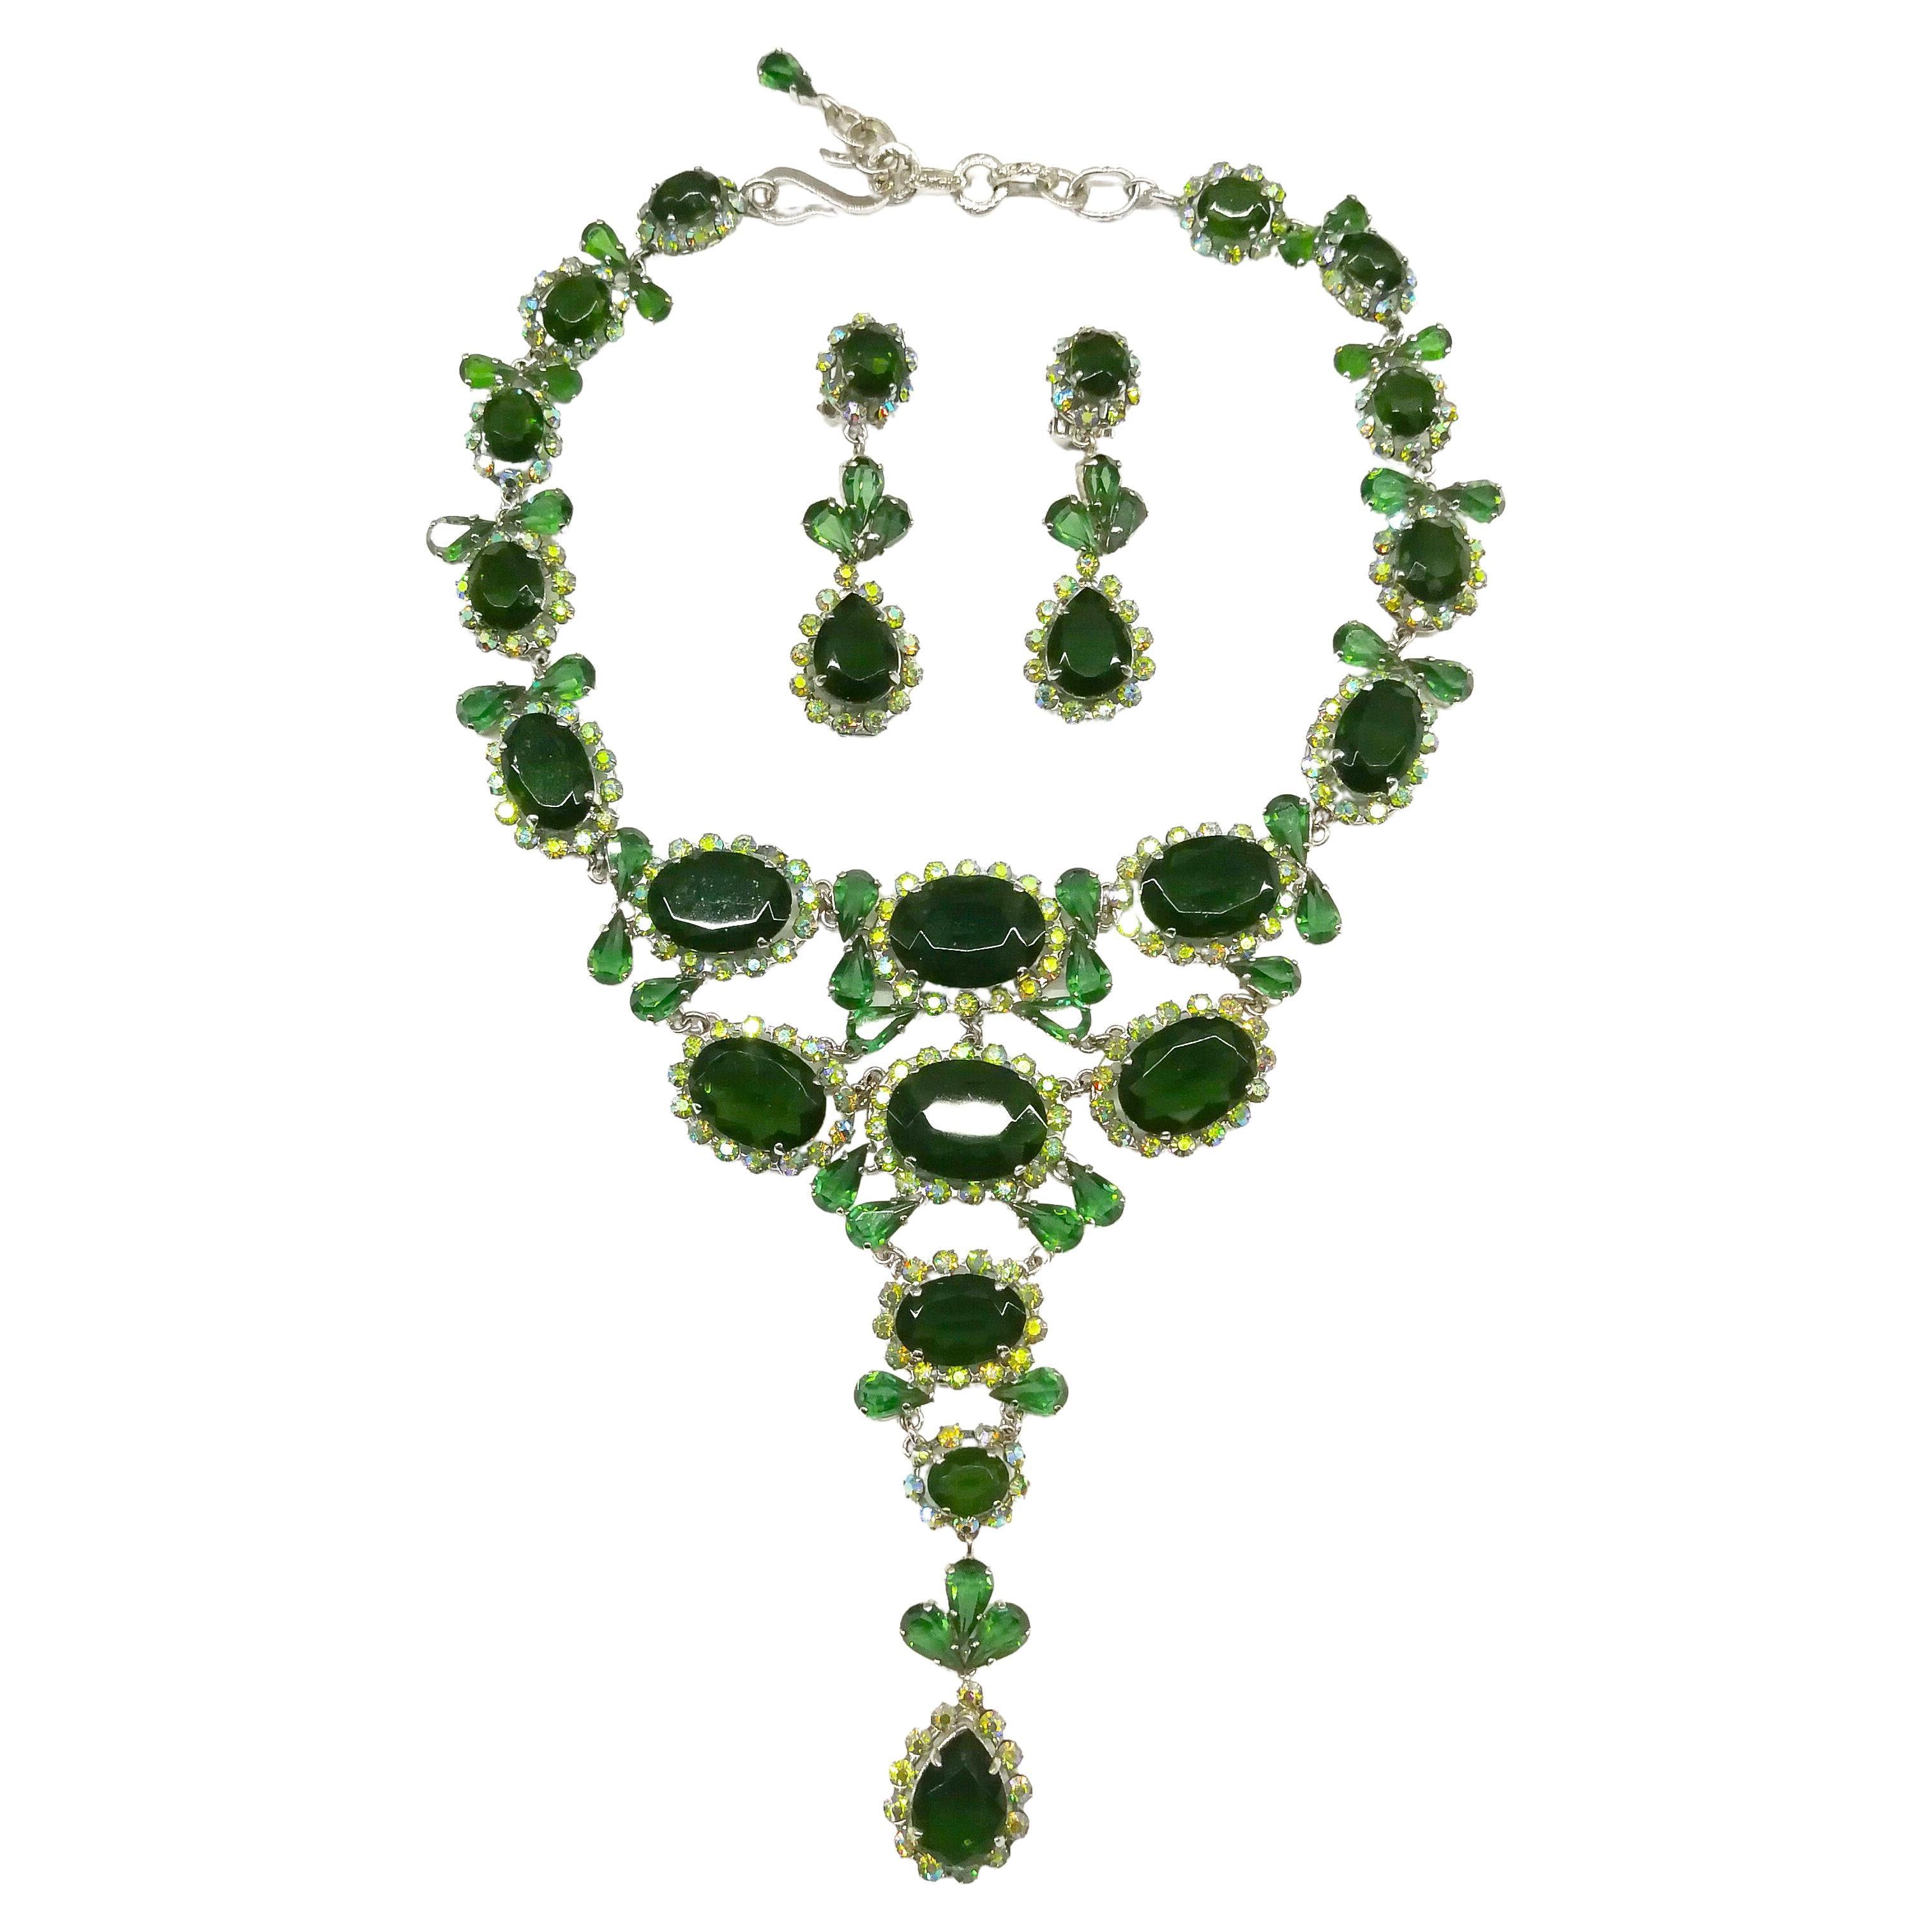 A very striking necklace and earrings, Henkel & Grosse for Christian Dior, 1957.